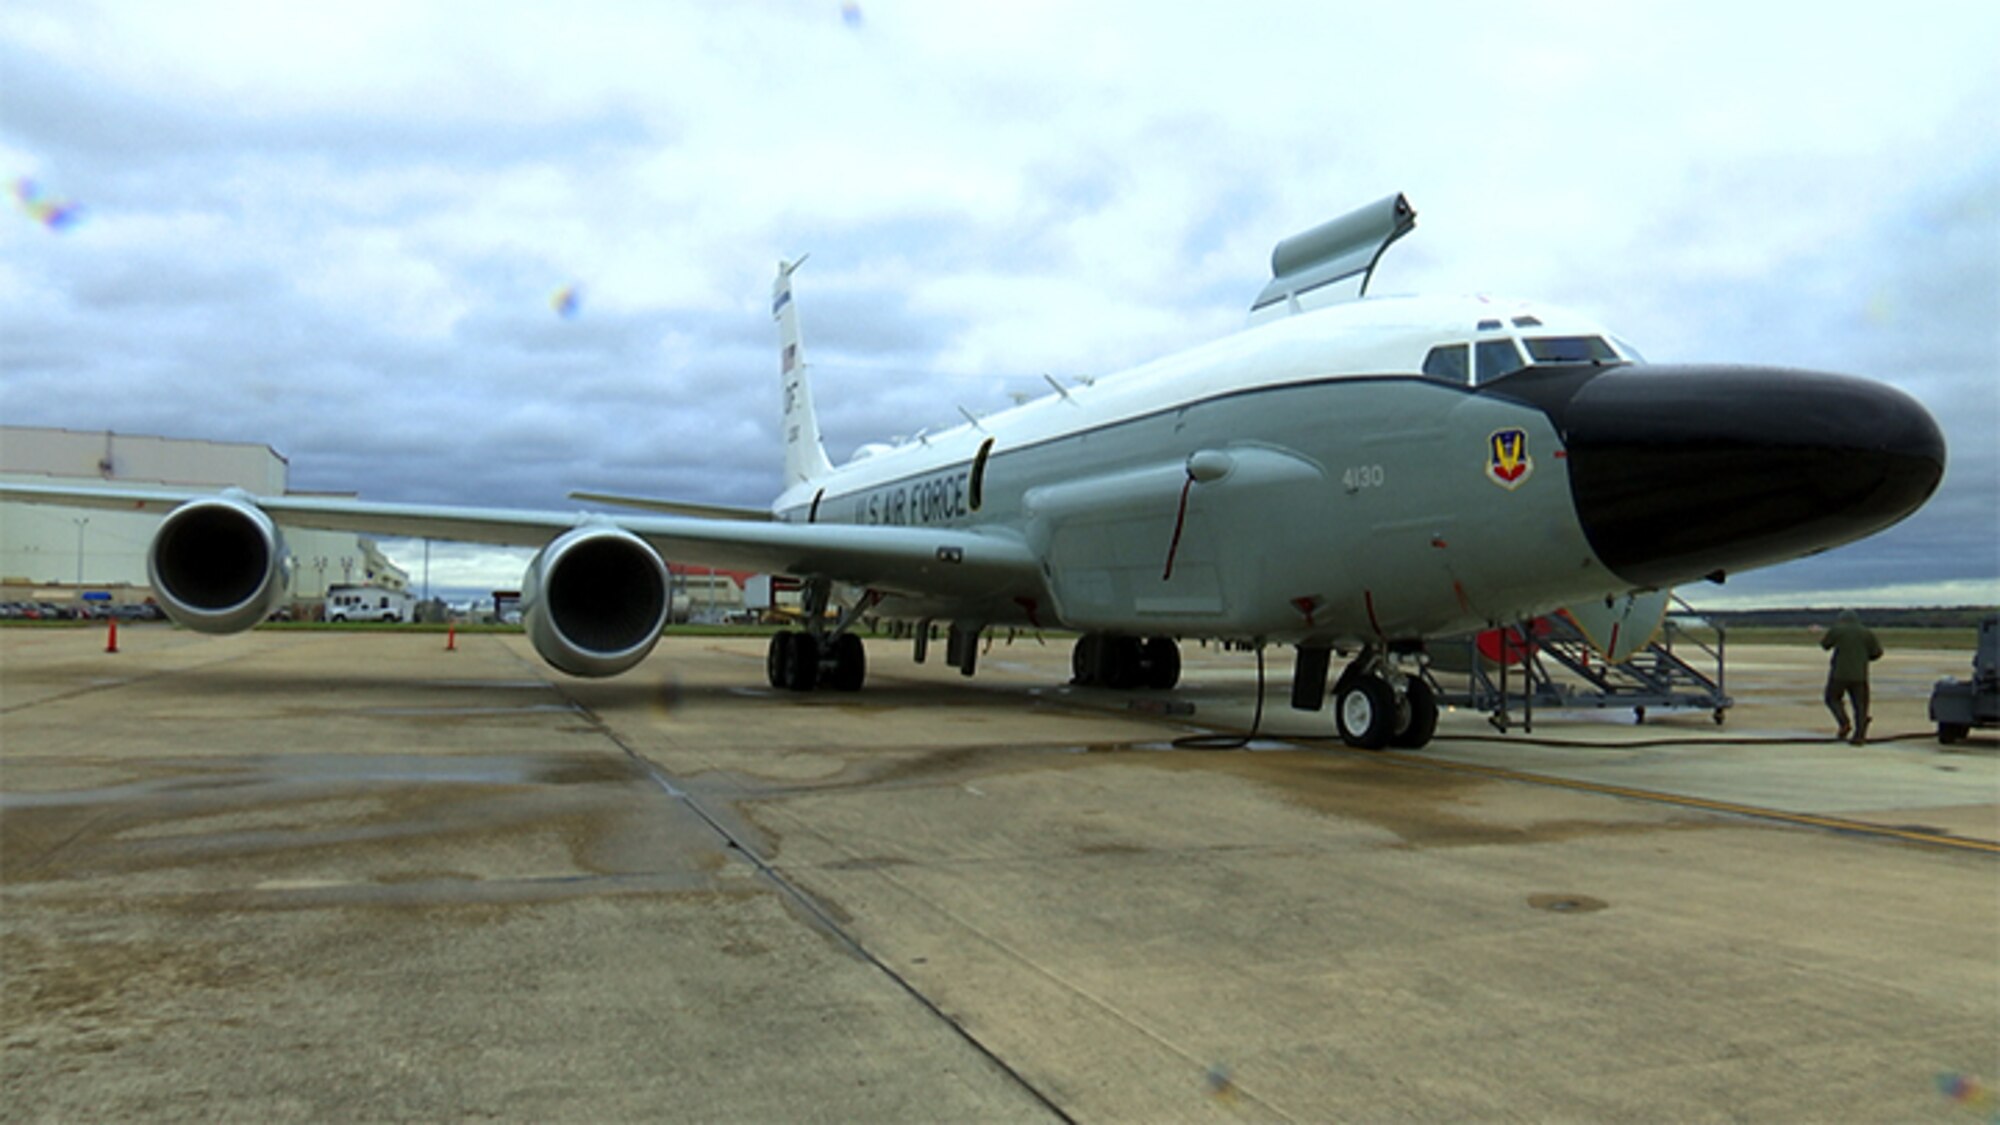 U.S. Air Force Airmen with the 55th Wing, Offutt Air Force Base, Nebraska, demonstrate the unique capabilities of the RC-135 known as Rivet Joint at JBSA Lackland, Texas, Feb. 21, 2020. The Rivet Joint is one of Sixteenth Air Force's aerial assets used for Intelligence, Surveillance and Reconnaissance missions worldwide.